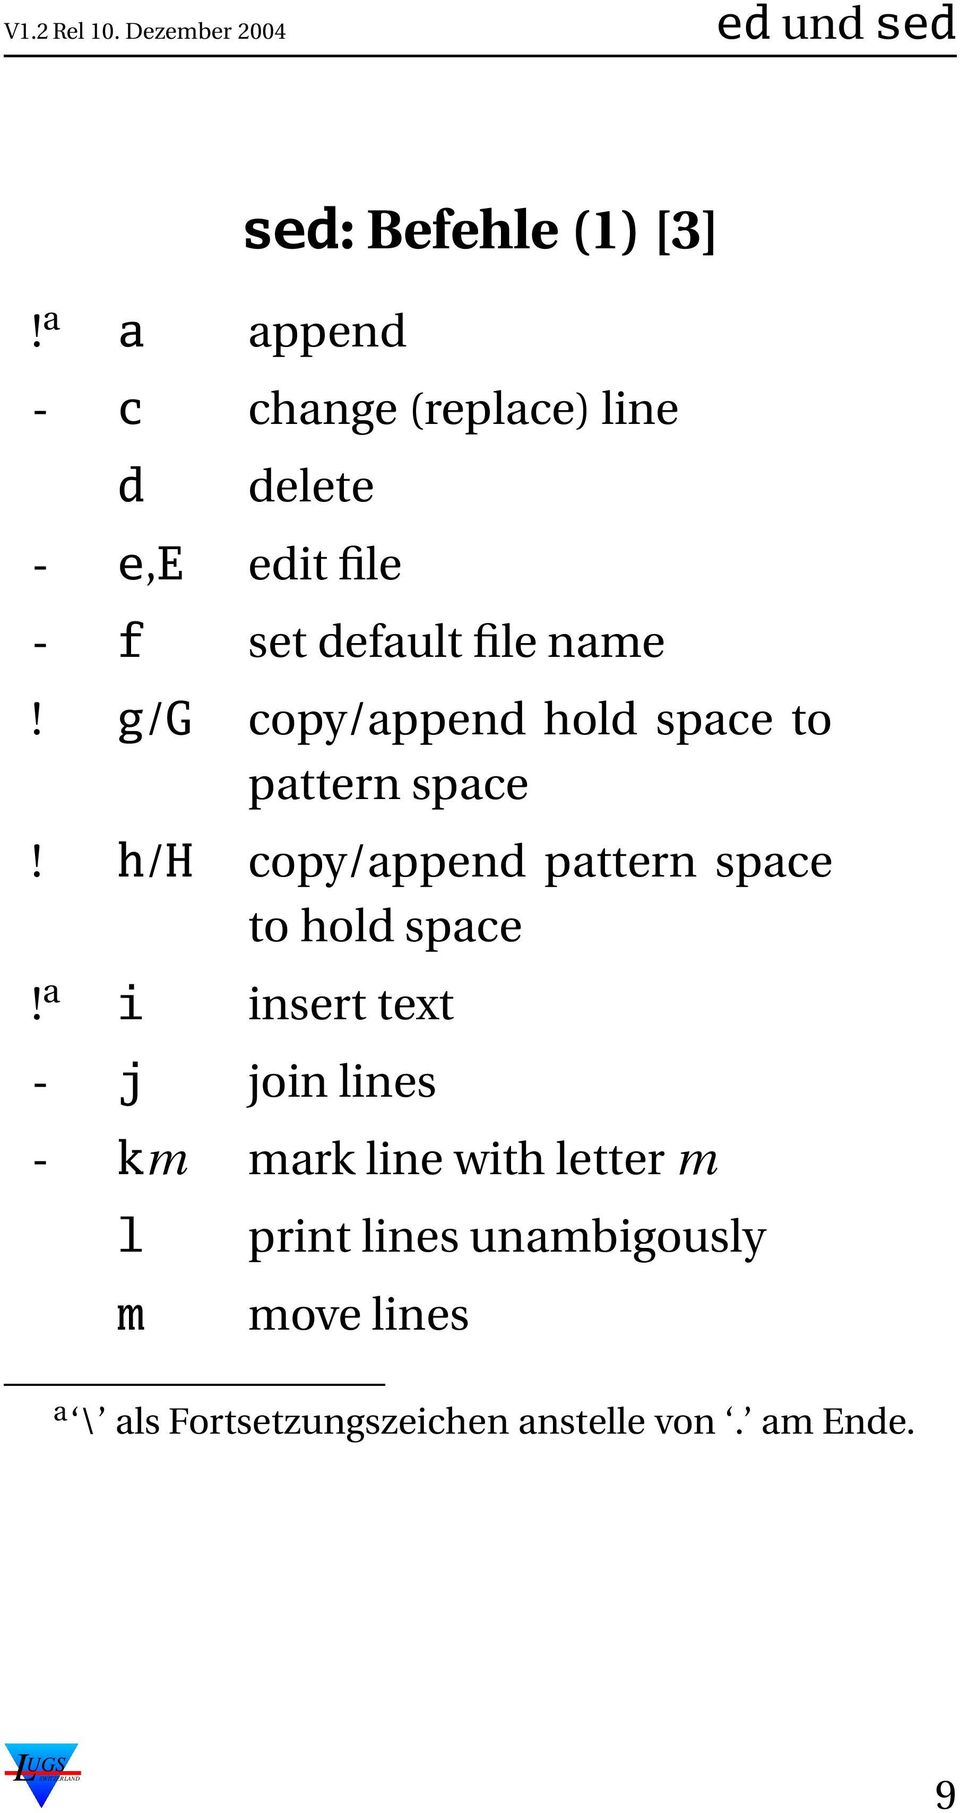 h/h copy/append pattern space to hold space!